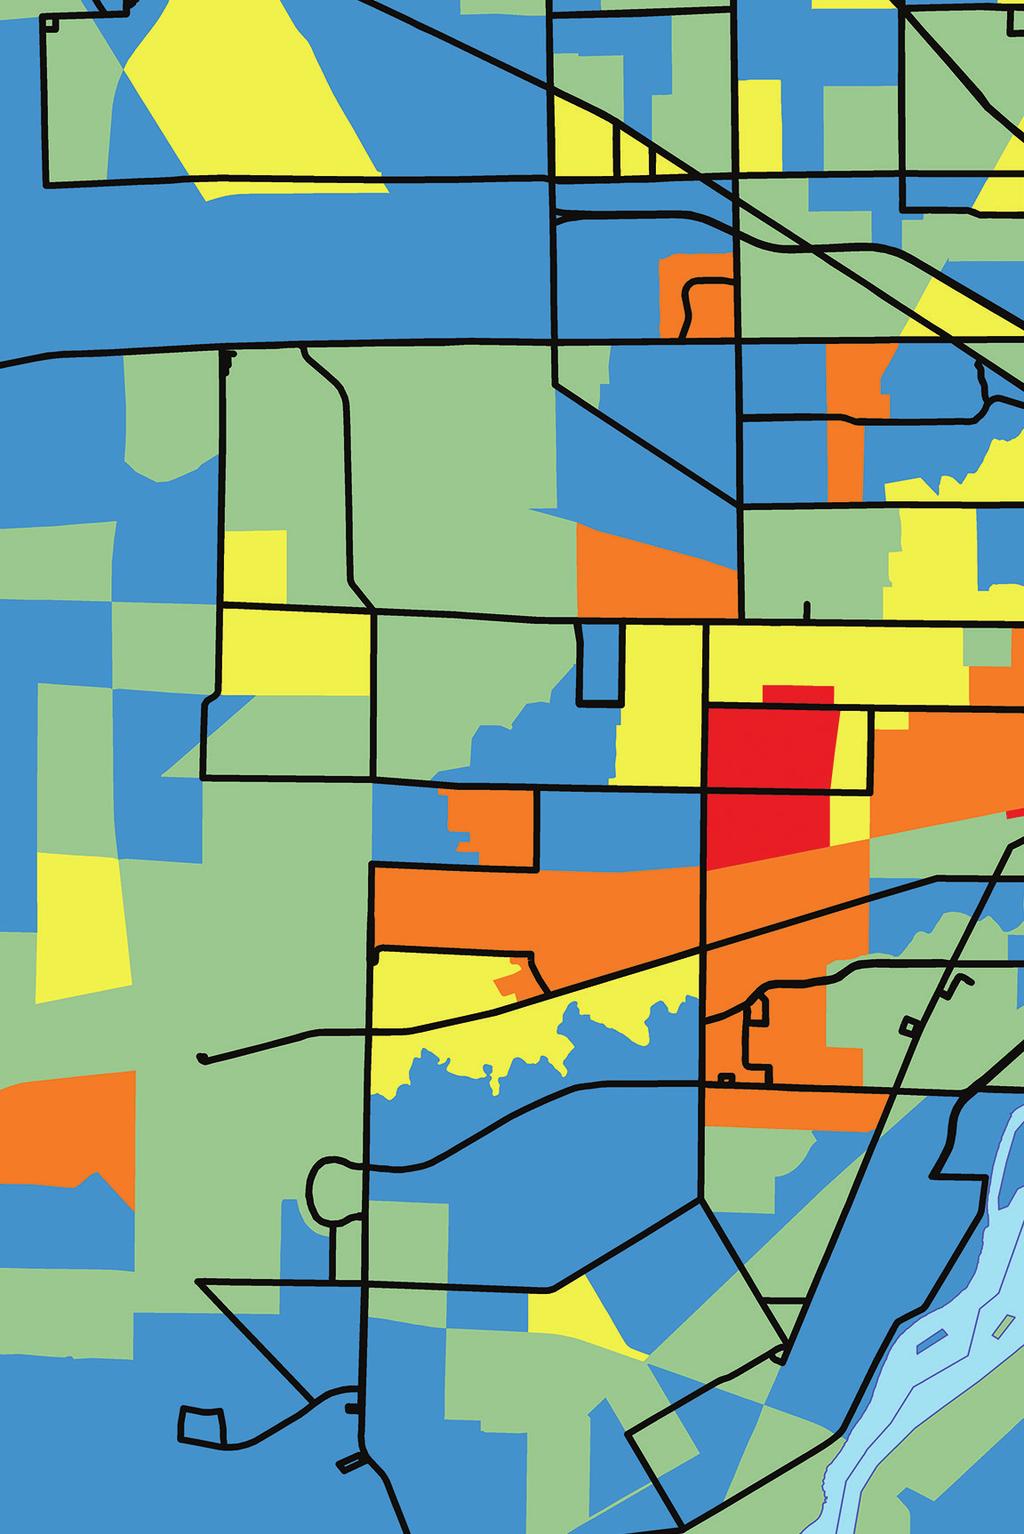 Visualizing opportunity through data ToledoView is a proprietary, online geographic database compiled by The Jack Ford Urban Affairs Center (UAC) and The University of Toledo s Center for Geographic